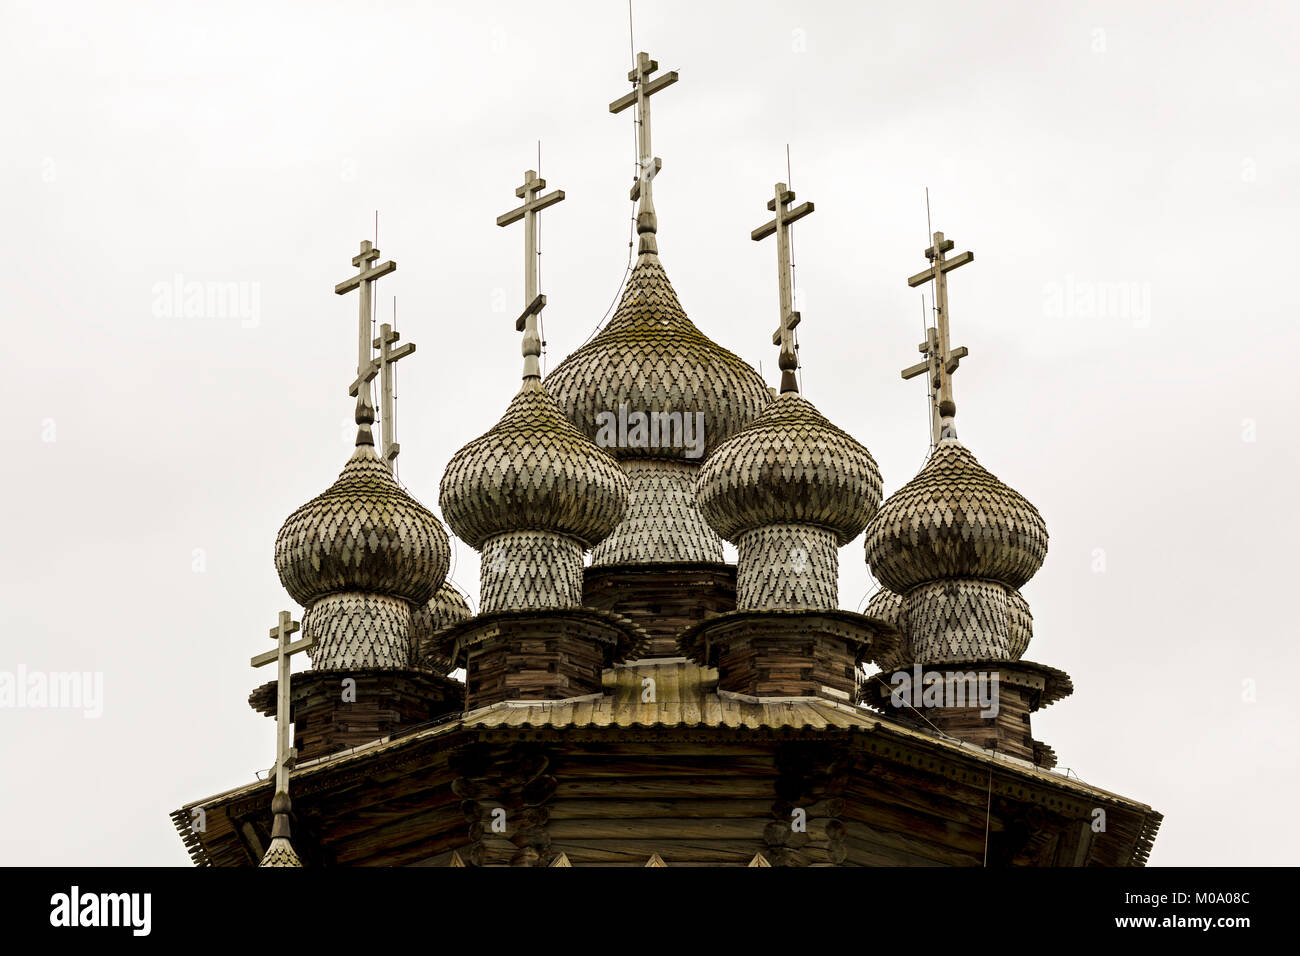 The domes of the christi transfiguration church on the island of Kizhi, Russia. Stock Photo